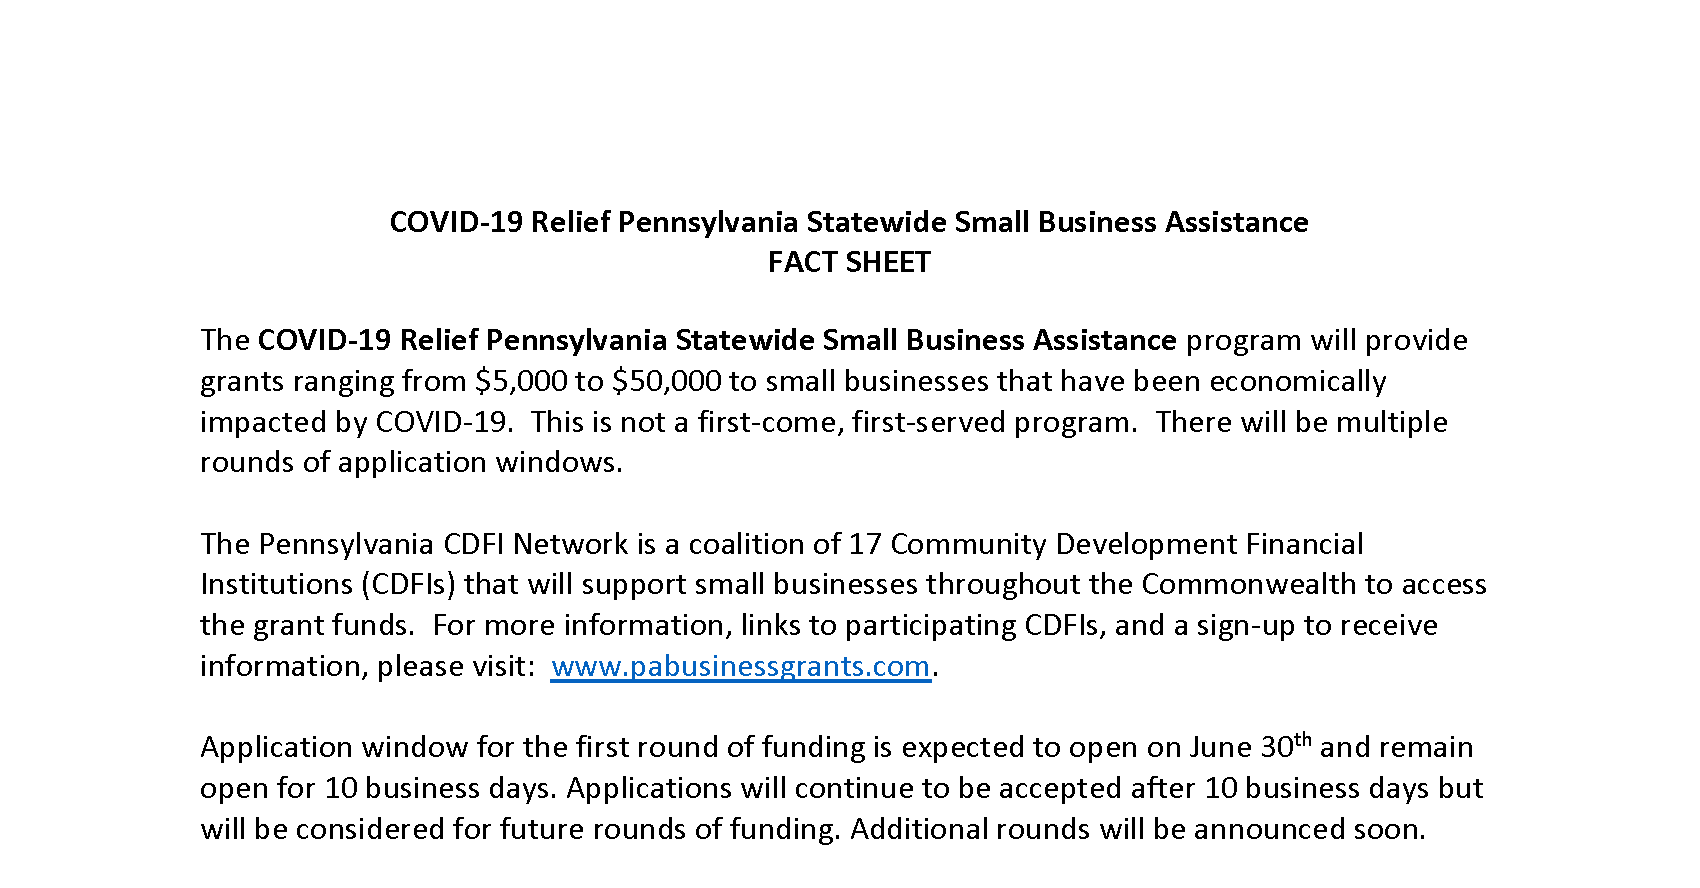 COVID19 Relief Pennsylvania Statewide Small Business Assistance Fact